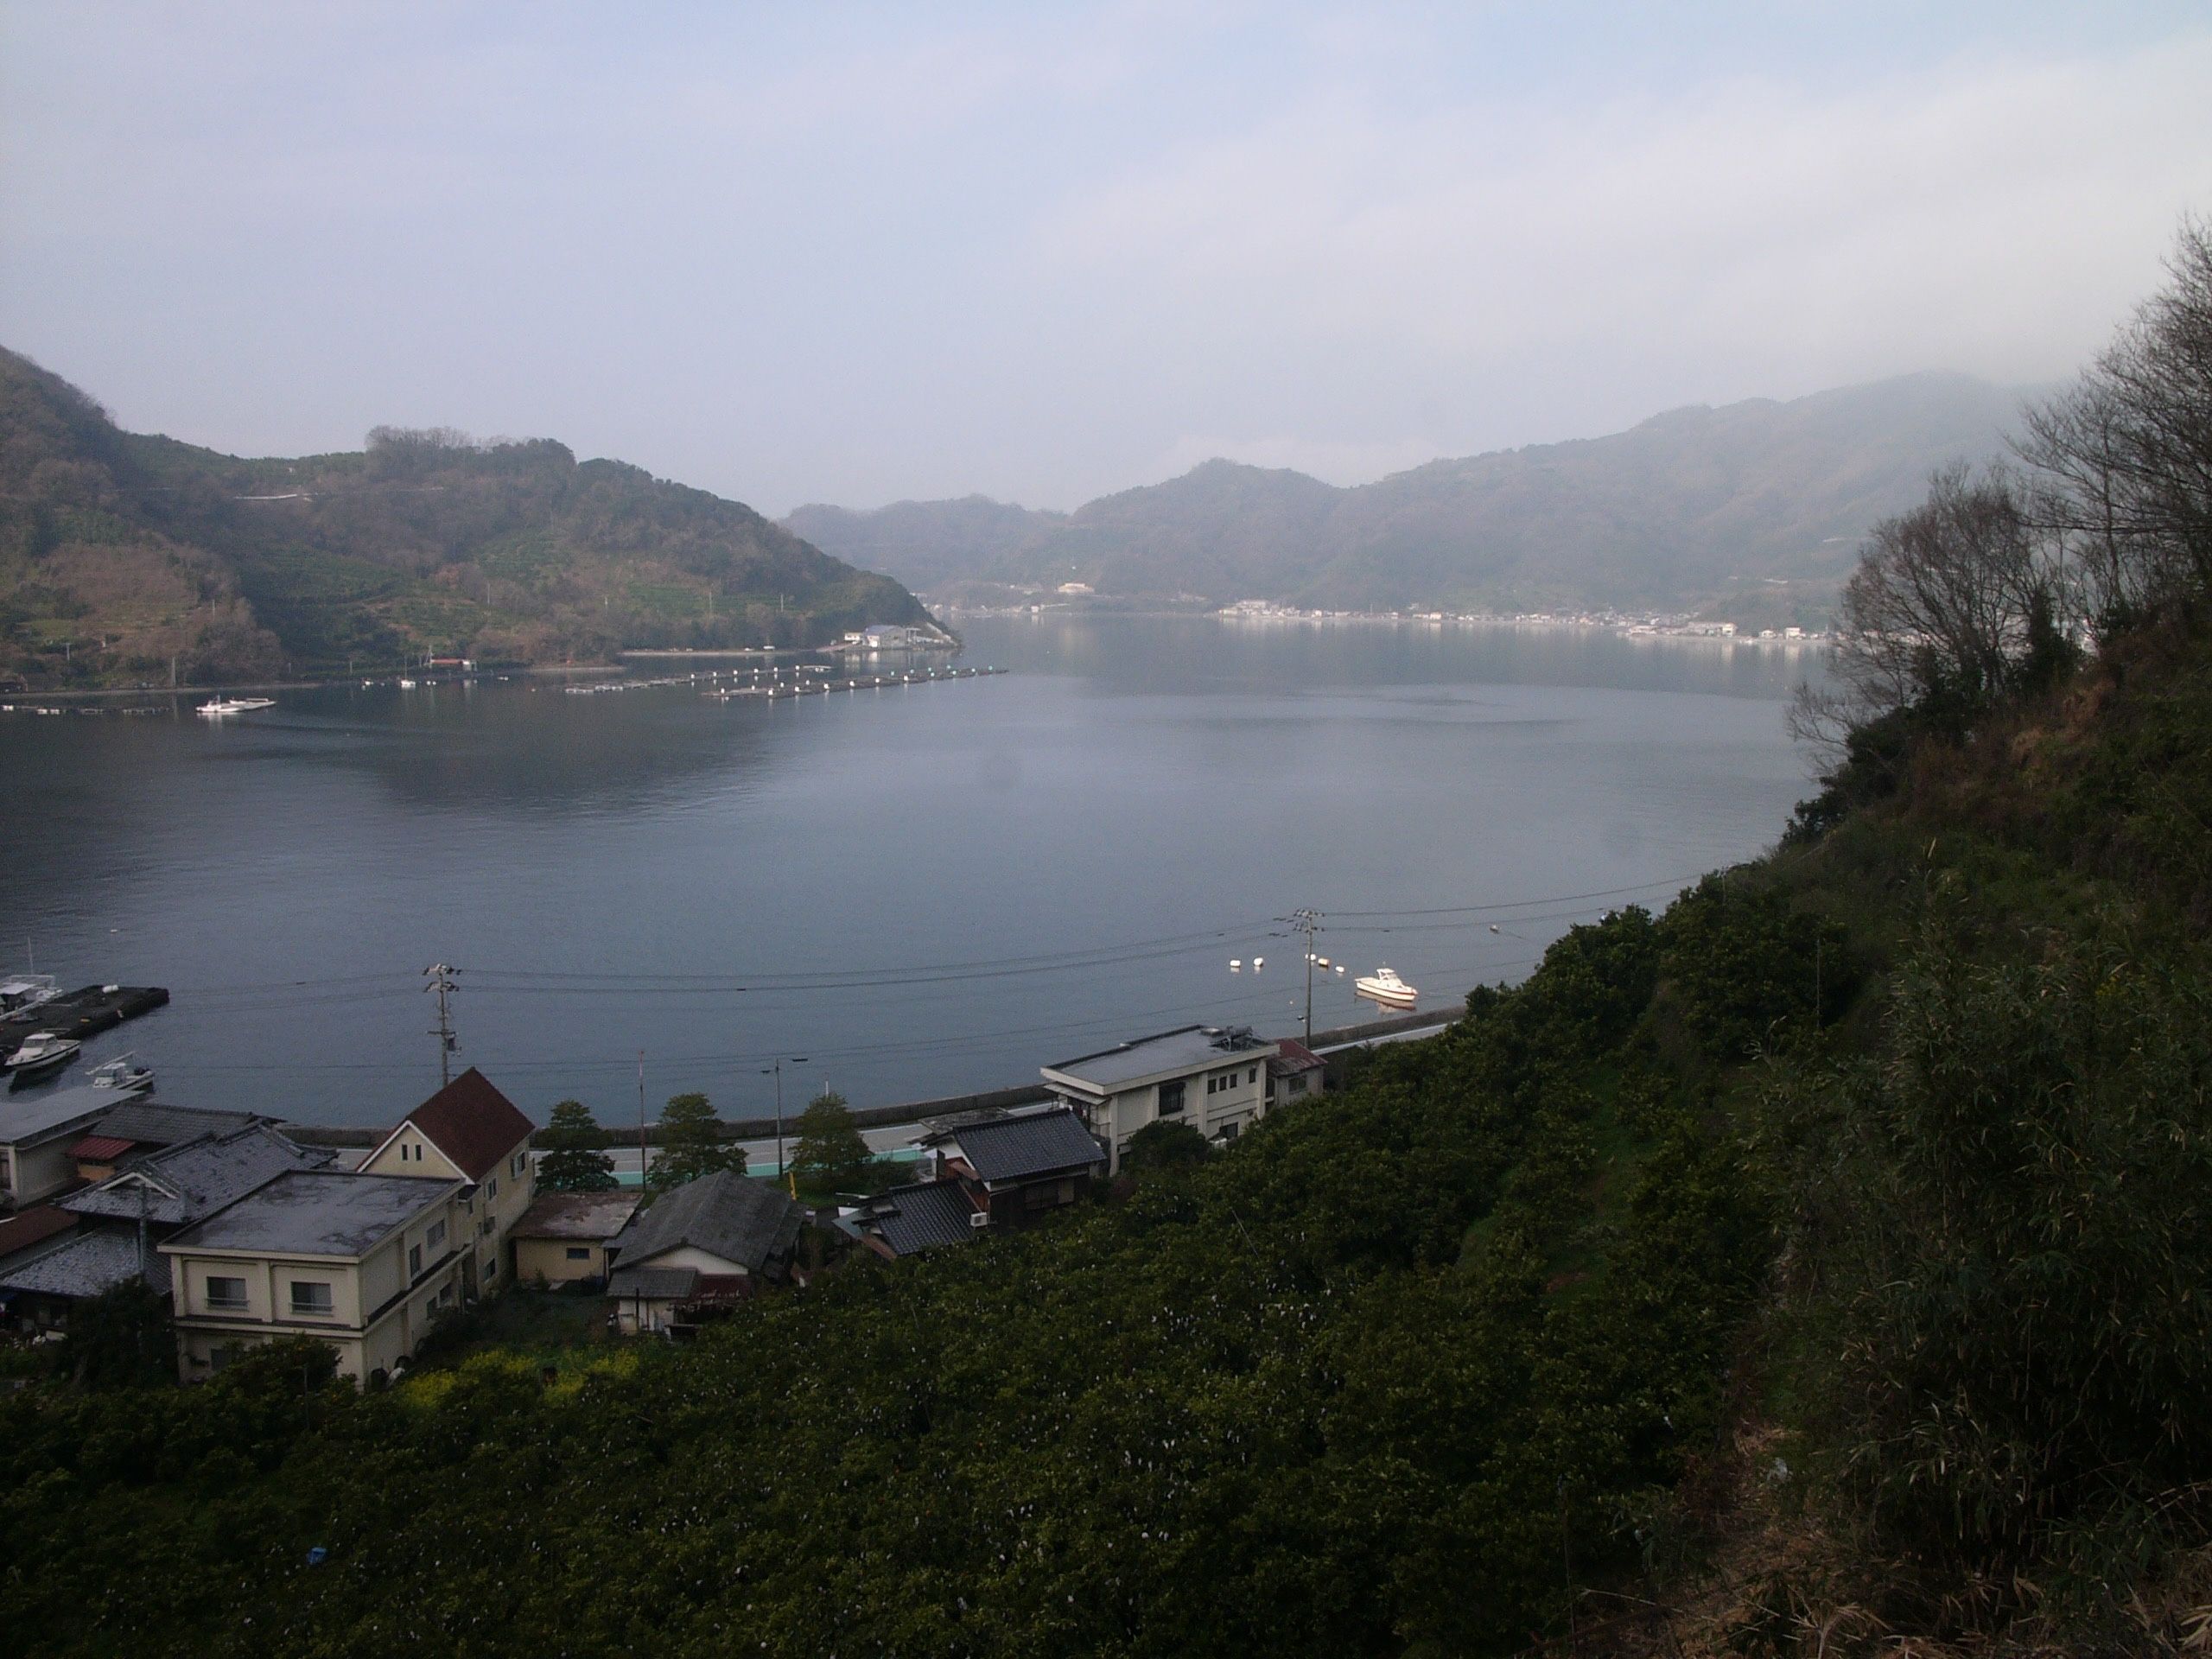 Panorama of a small bay surrounded by forested hills.